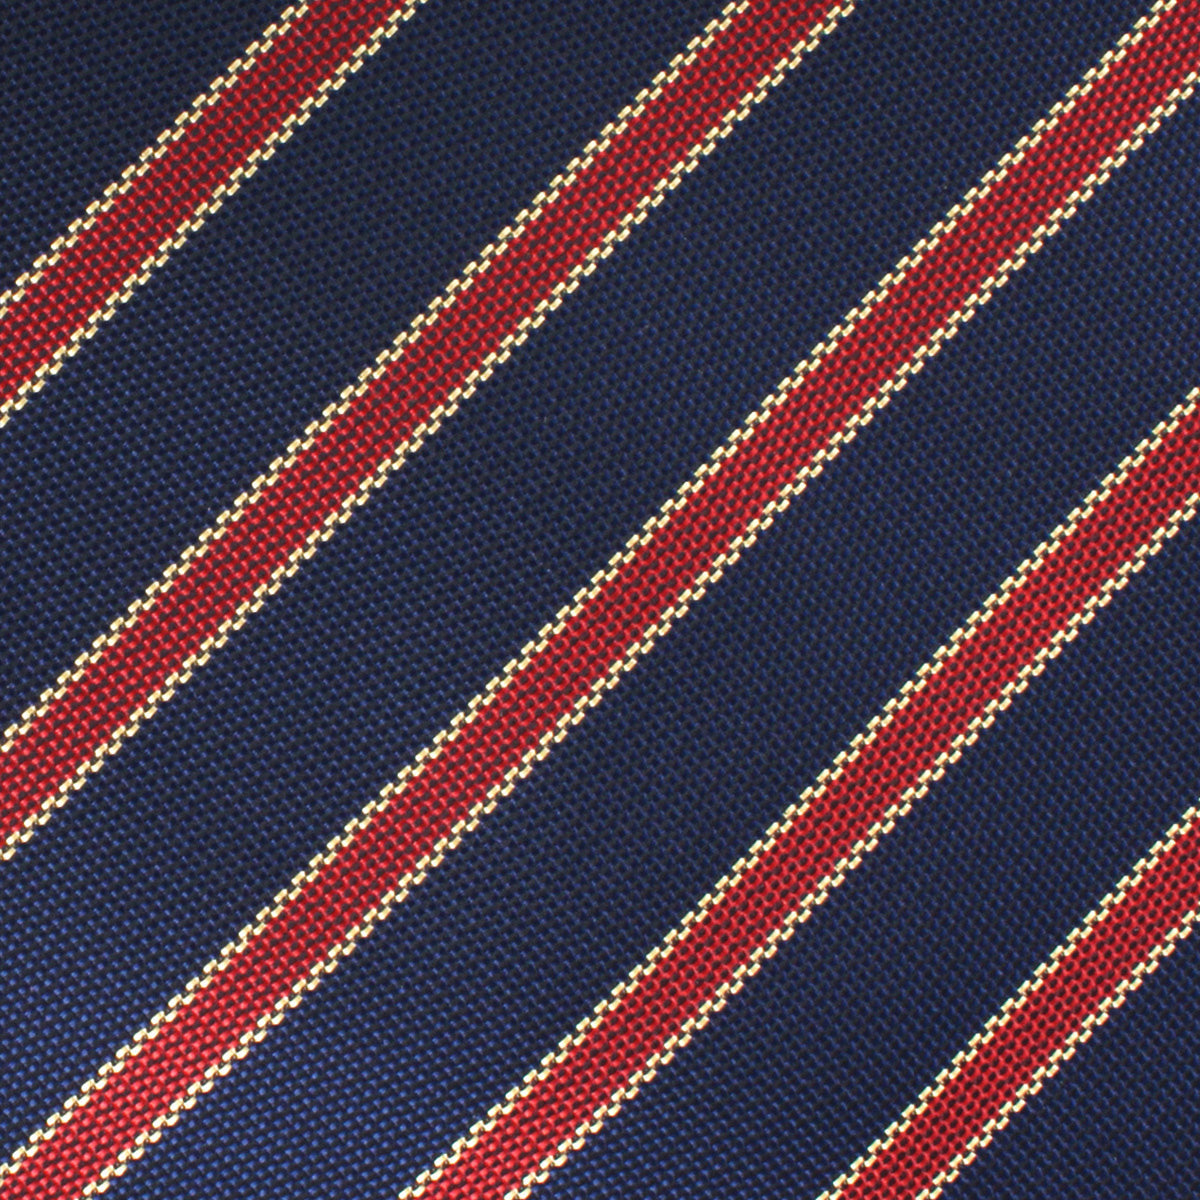 Cambridge Navy Blue with Royal Red Stripes Pocket Square Fabric